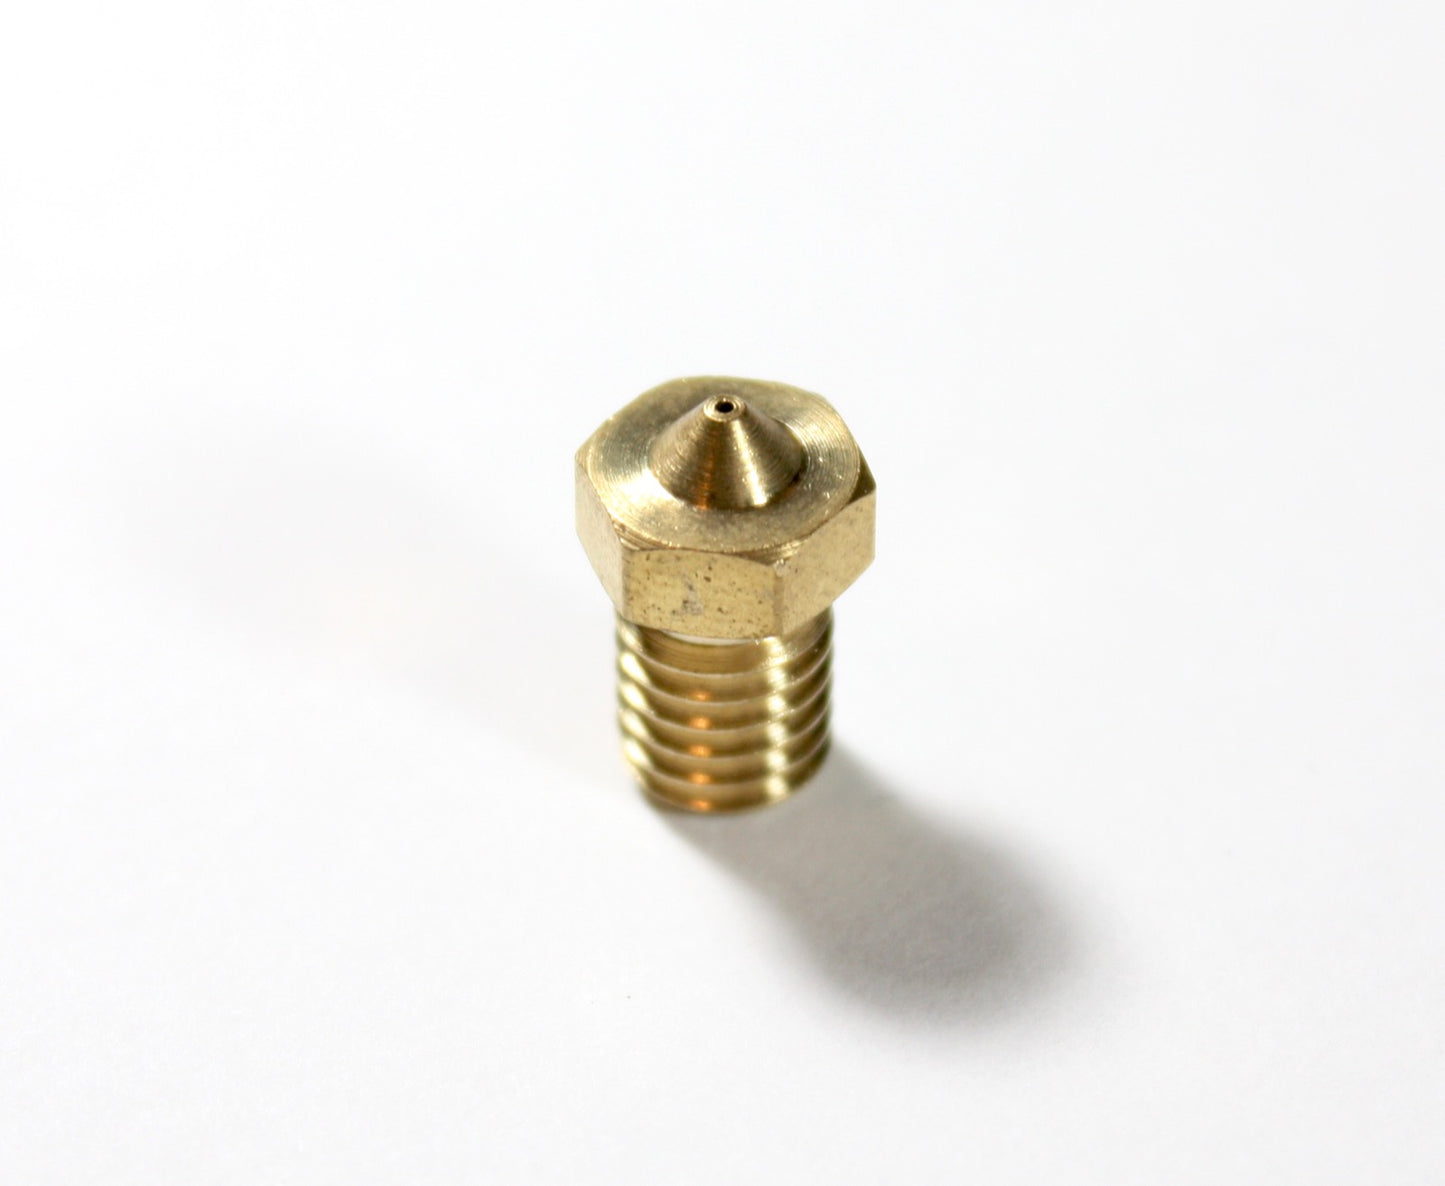 M6 Extruder Nozzle 0.3 mm for 1.75 mm Filament